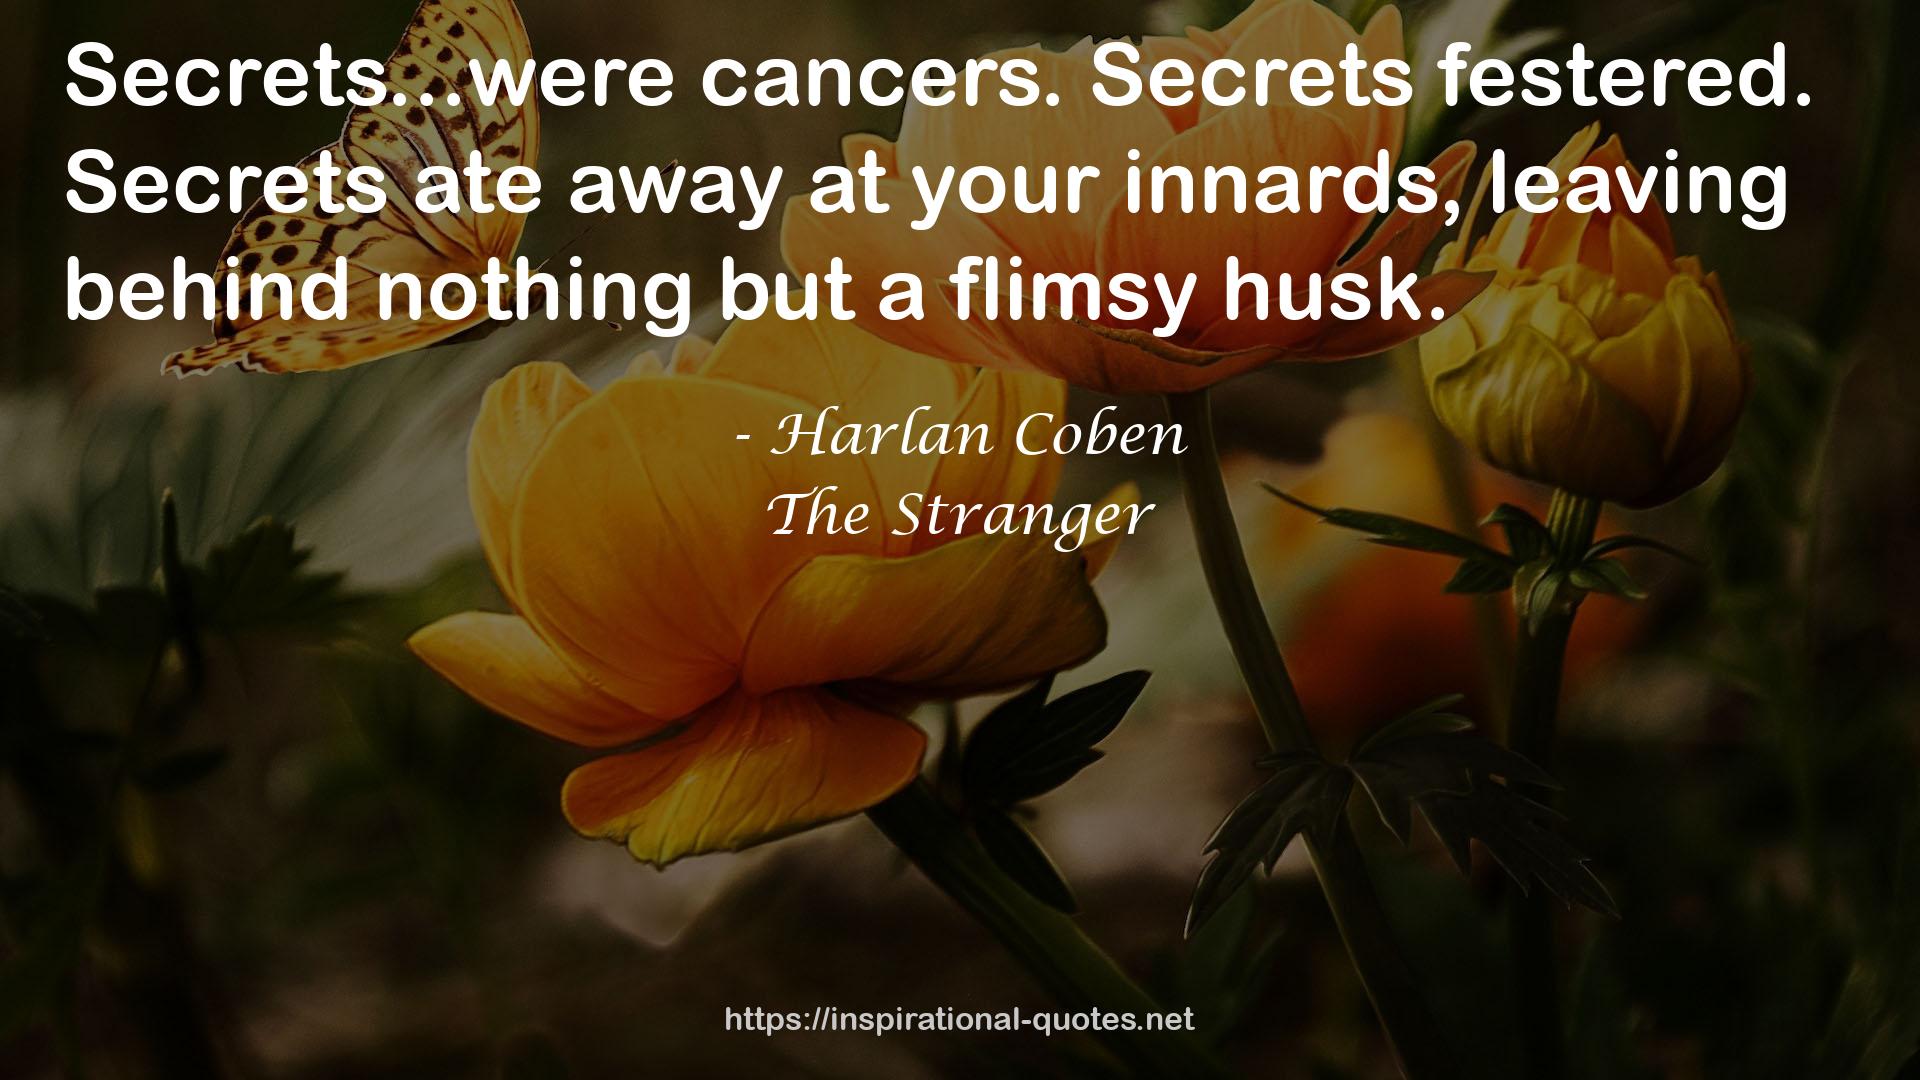 The Stranger QUOTES